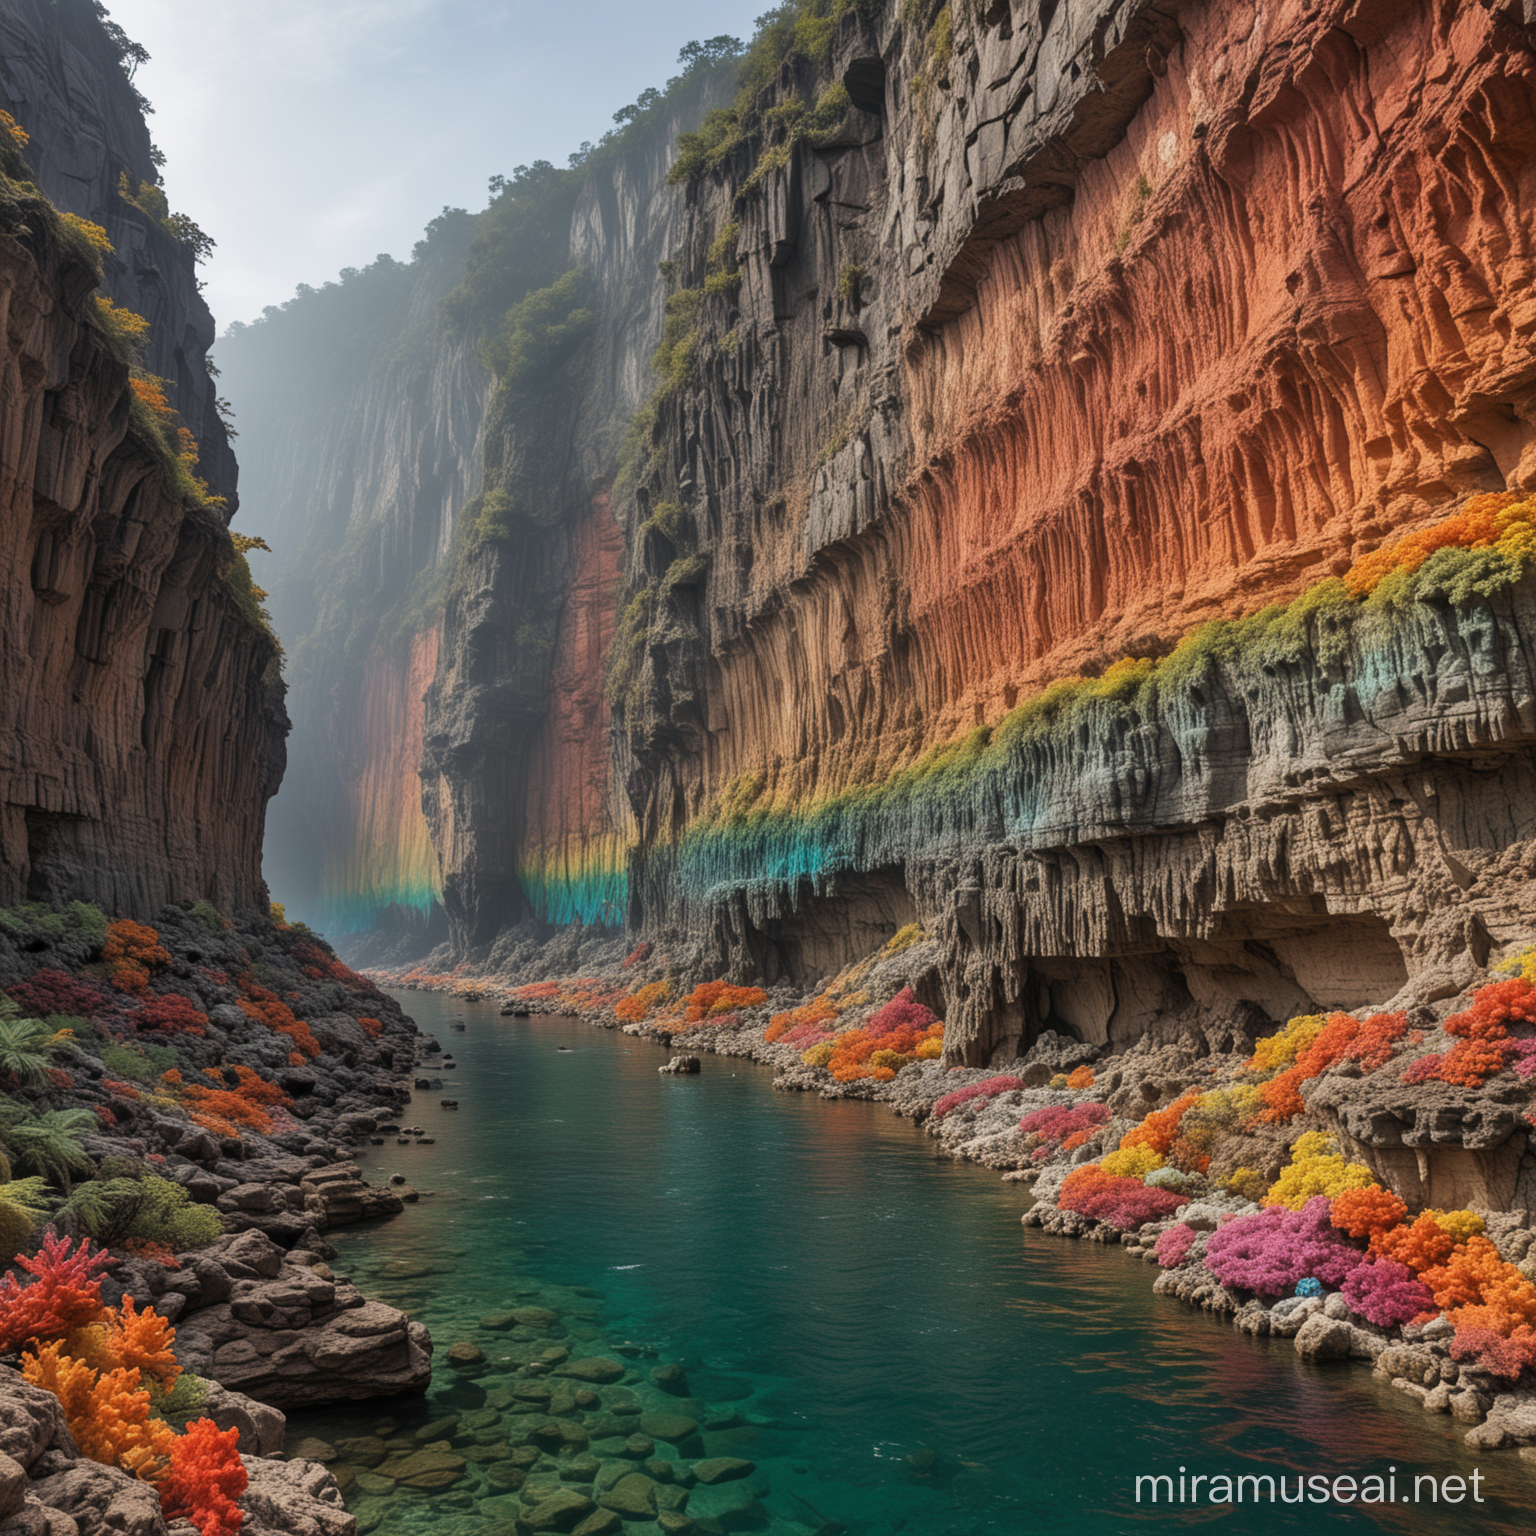 Rainbow Coral Lined River Canyon with Prehistoric Skeletons